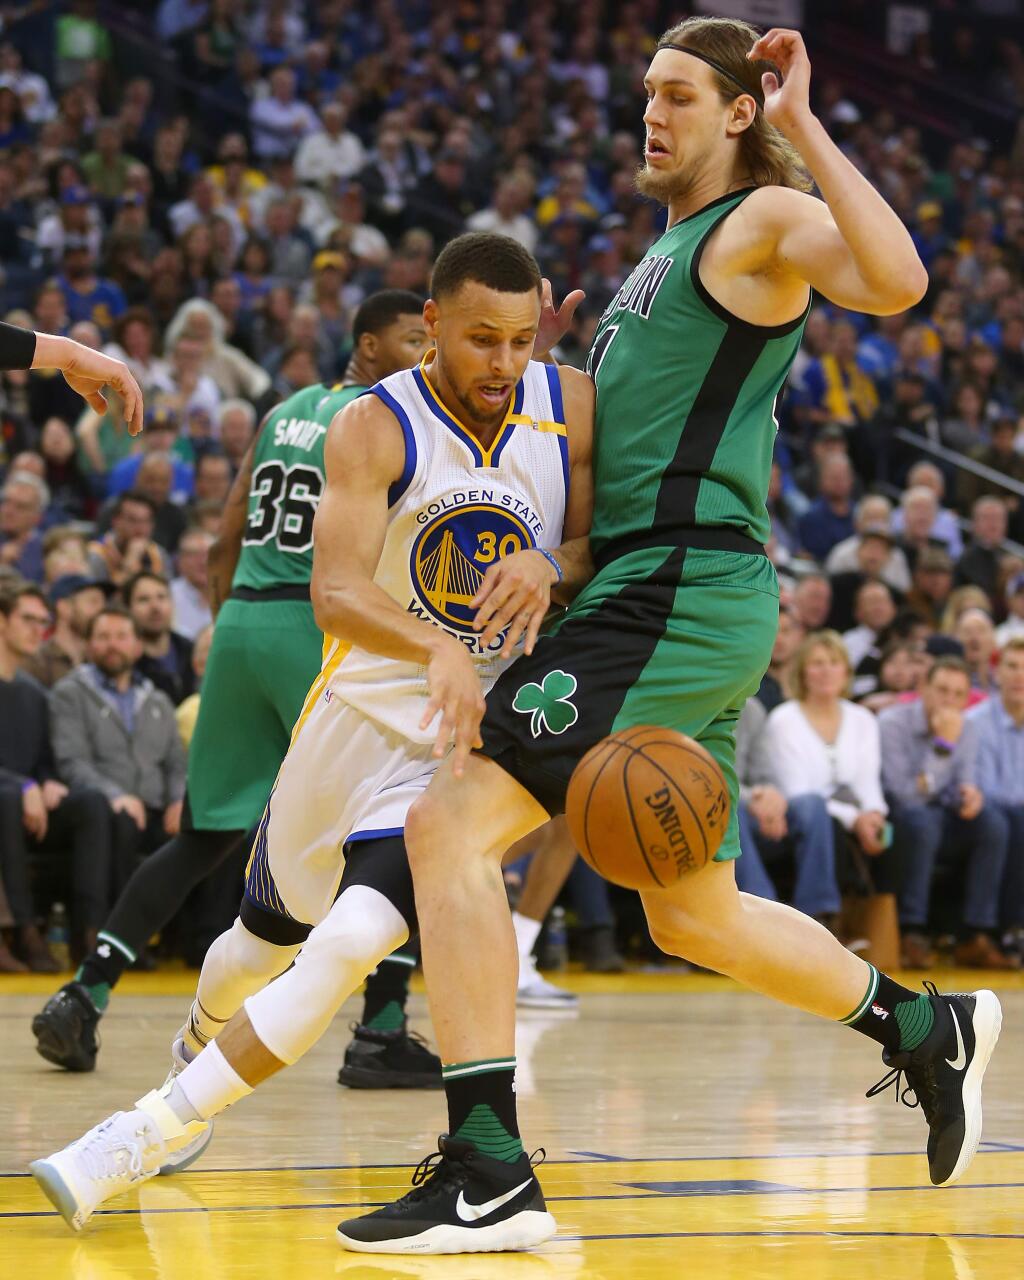 Golden State Warriors guard Stephen Curry drives around Boston Celtics forward Kelly Olynyk in Oakland on Wednesday, March 8. (Christopher Chung/ The Press Democrat)